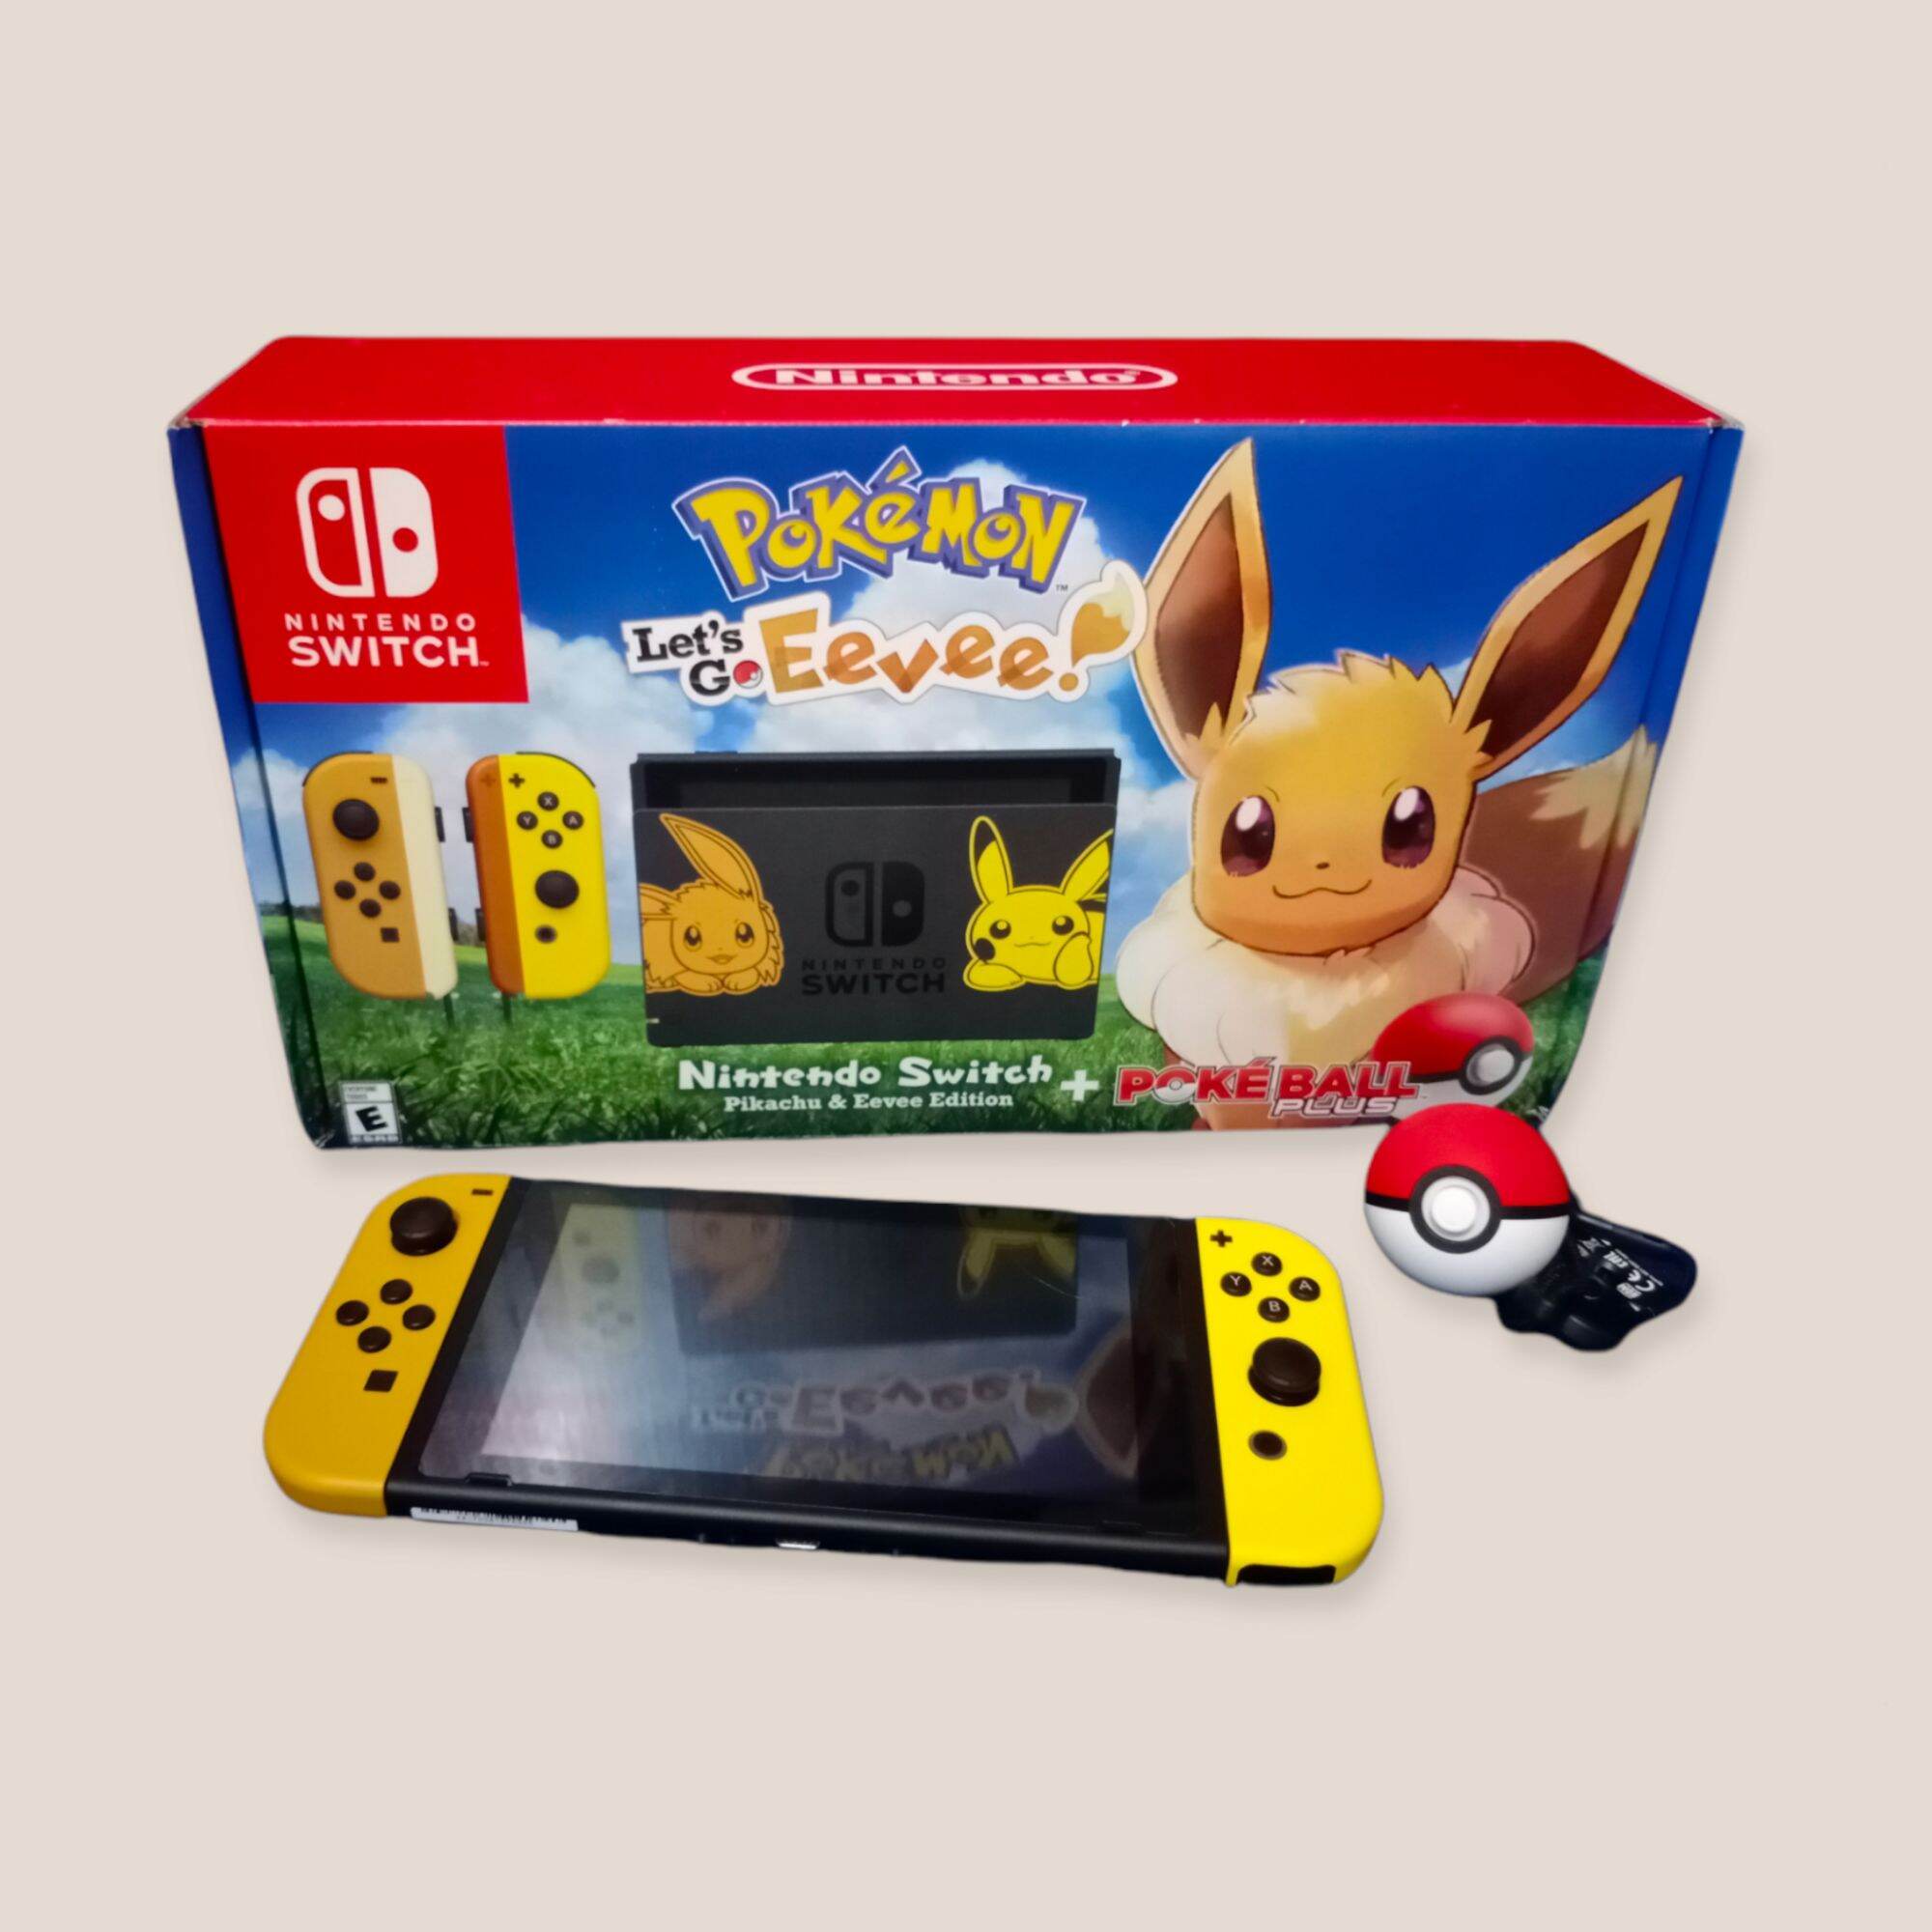 Nintendo Switch Lite 32GB Handheld Game Console In Yellow With Pokemon: Let's Go, Eevee! Bundle | electricmall.com.ng